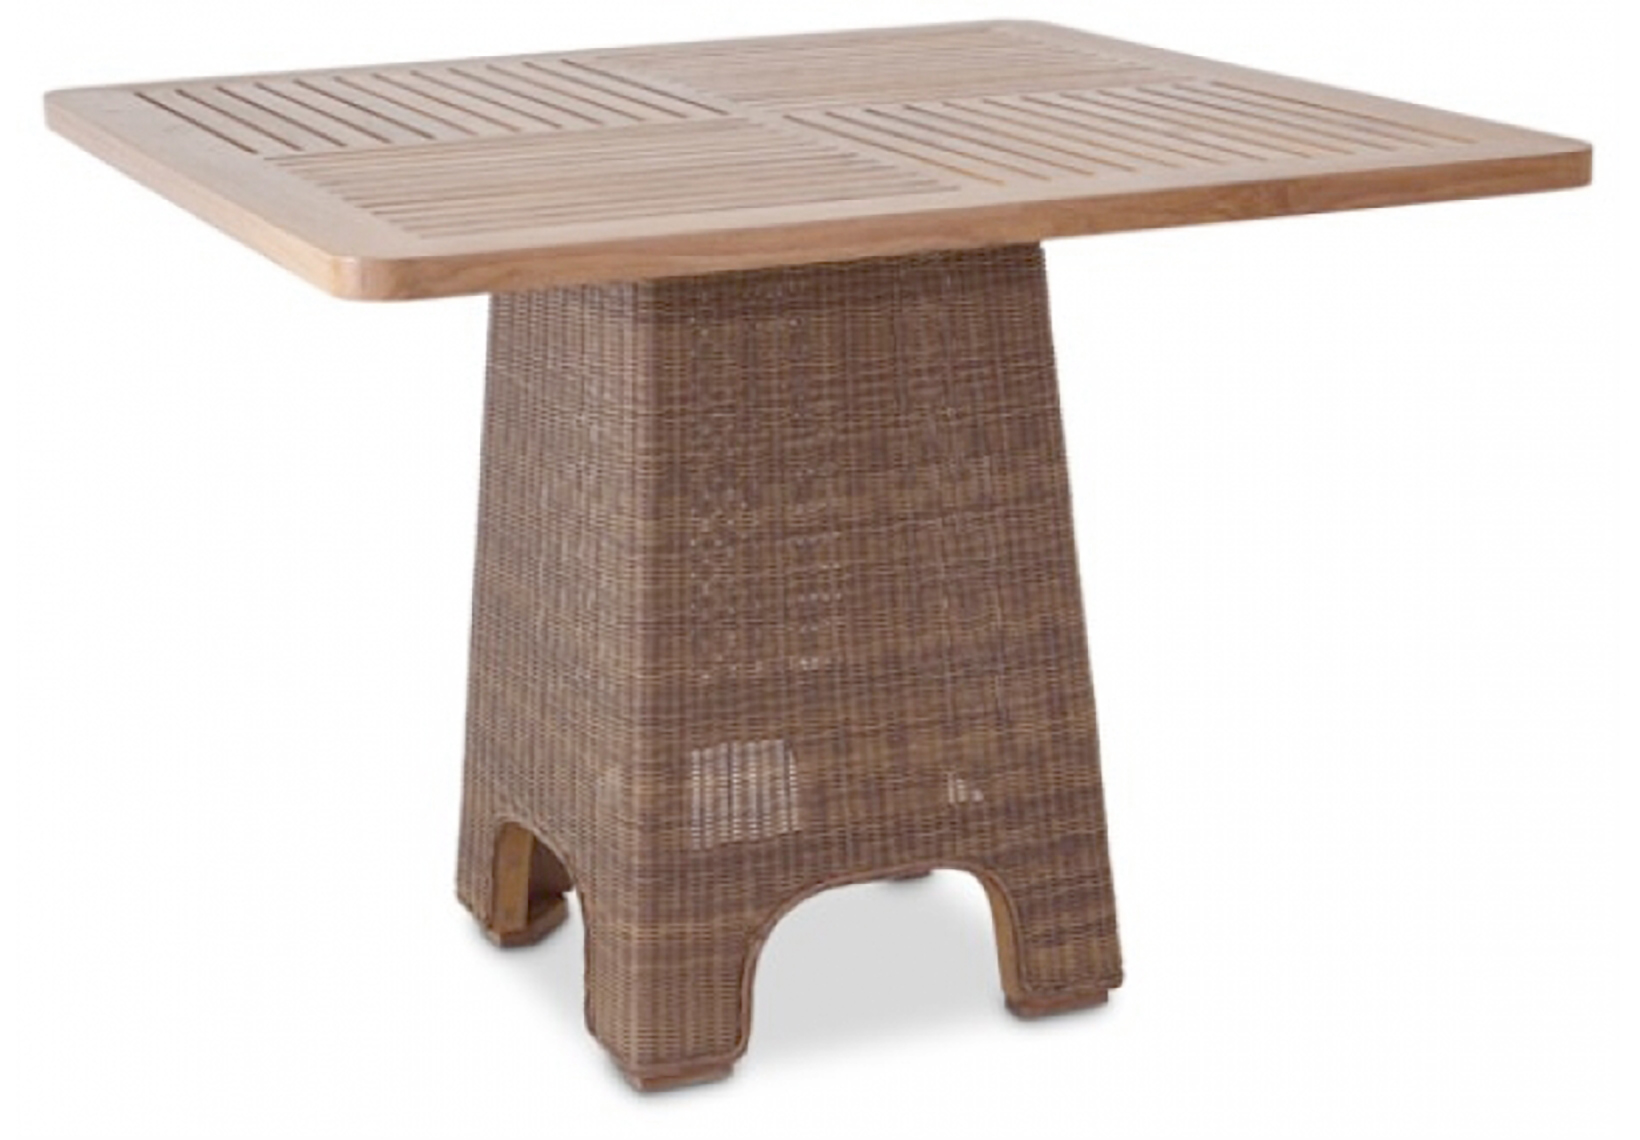 Teabu Square Dining Table